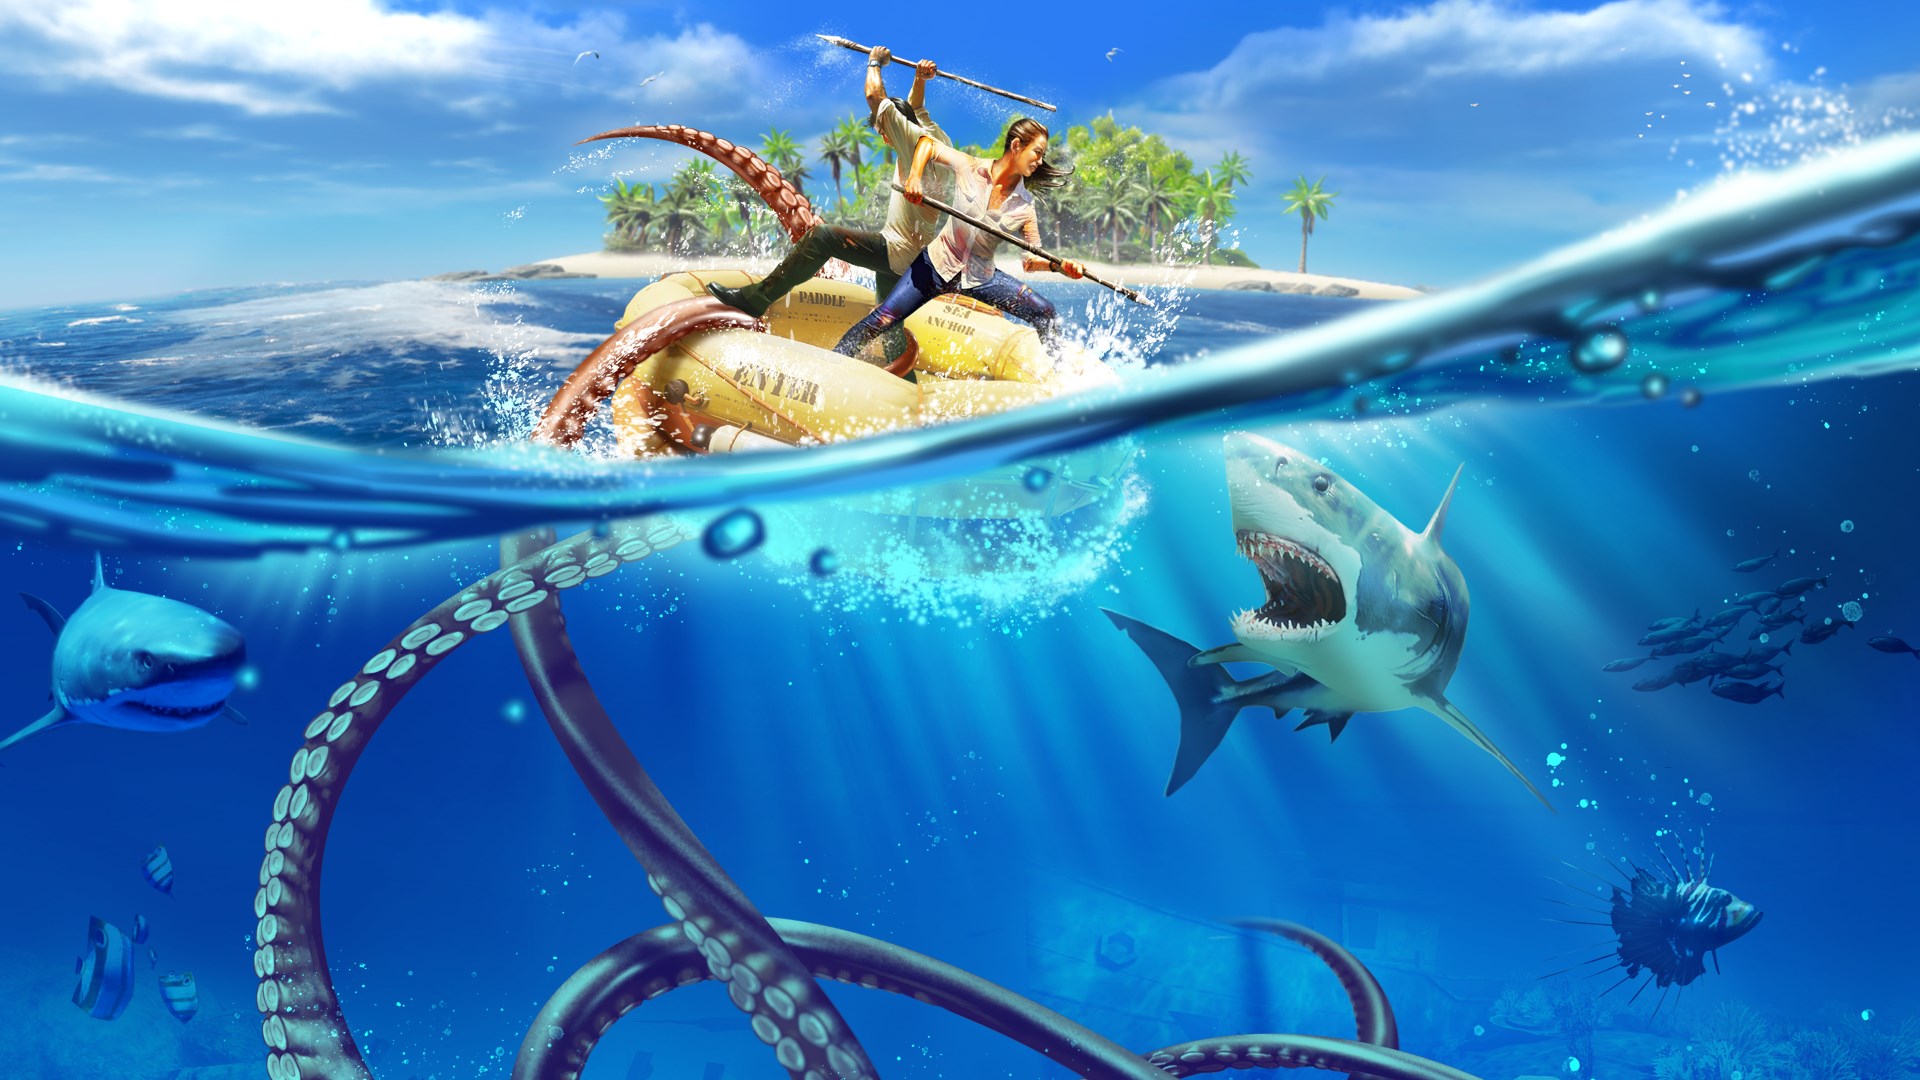 Stranded Deep update 1.11 surfaces, onlinie co-op now live